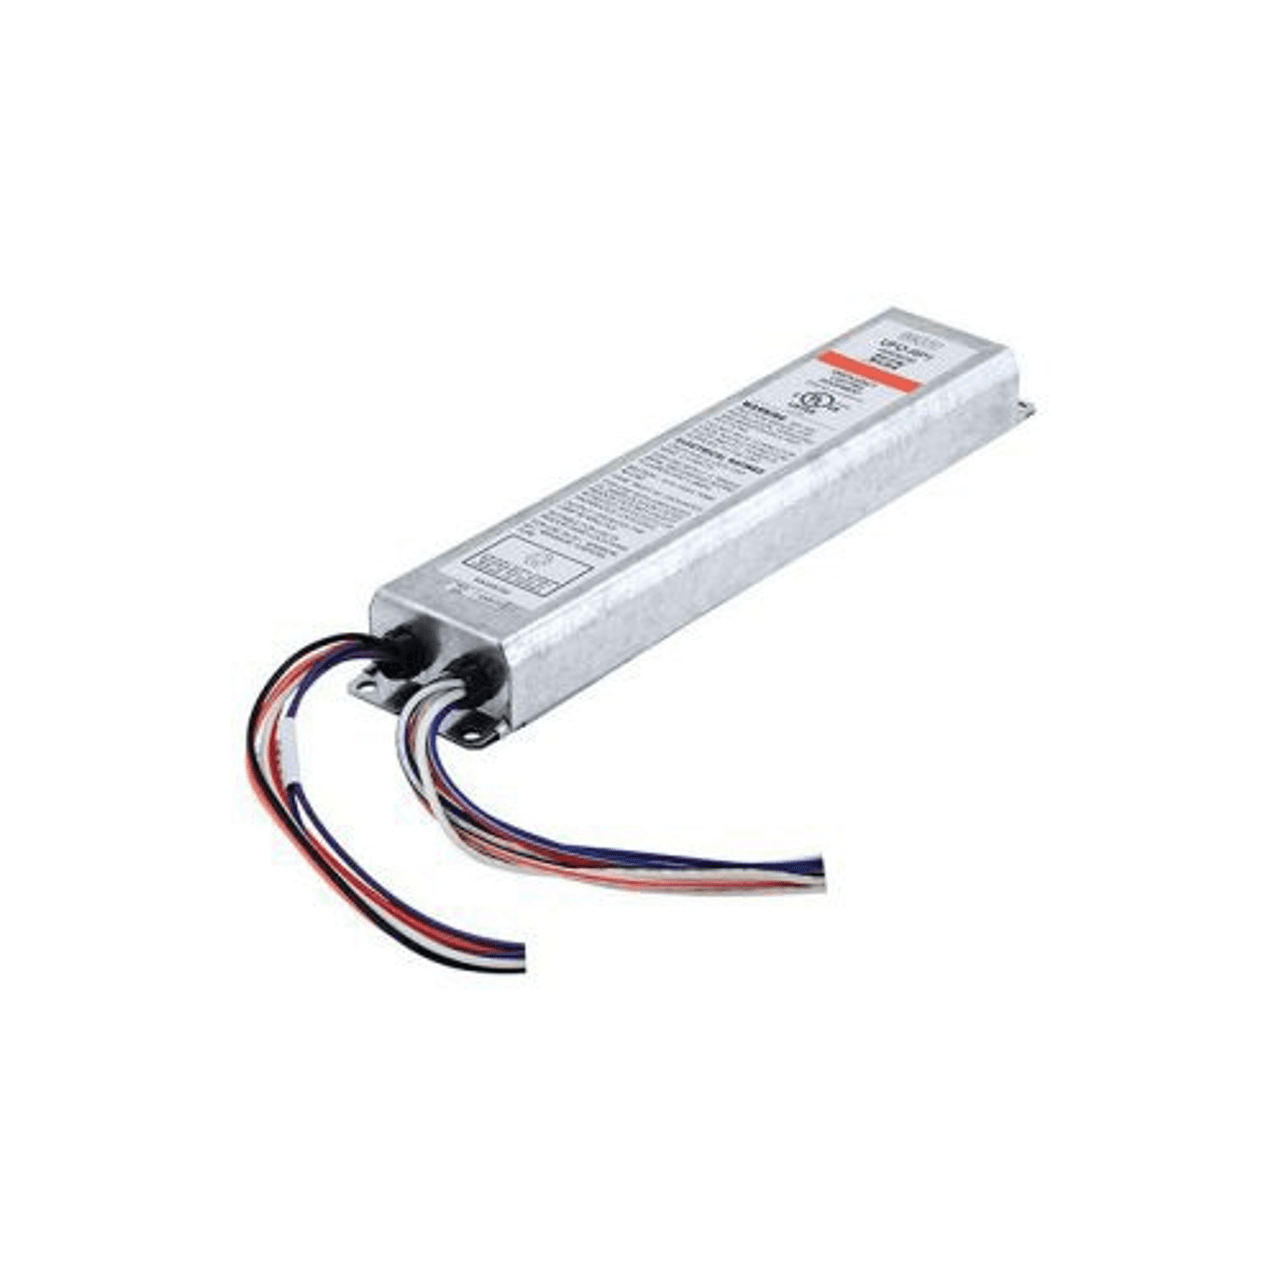 Hubbell UFO-RP1 Reduced Profile Emergency Battery Pack - Fluorescent, Lamp Type: Fluorescent, Lamp Wattage: 2.5 W, Lumen Range: 500 lm, N/A, Battery Type: Nickel Cadmium (maintenance free), Temperature Range: 20°C-55°C, Damp Location, Gray, 120/277 VAC.  ; Reduced Profil